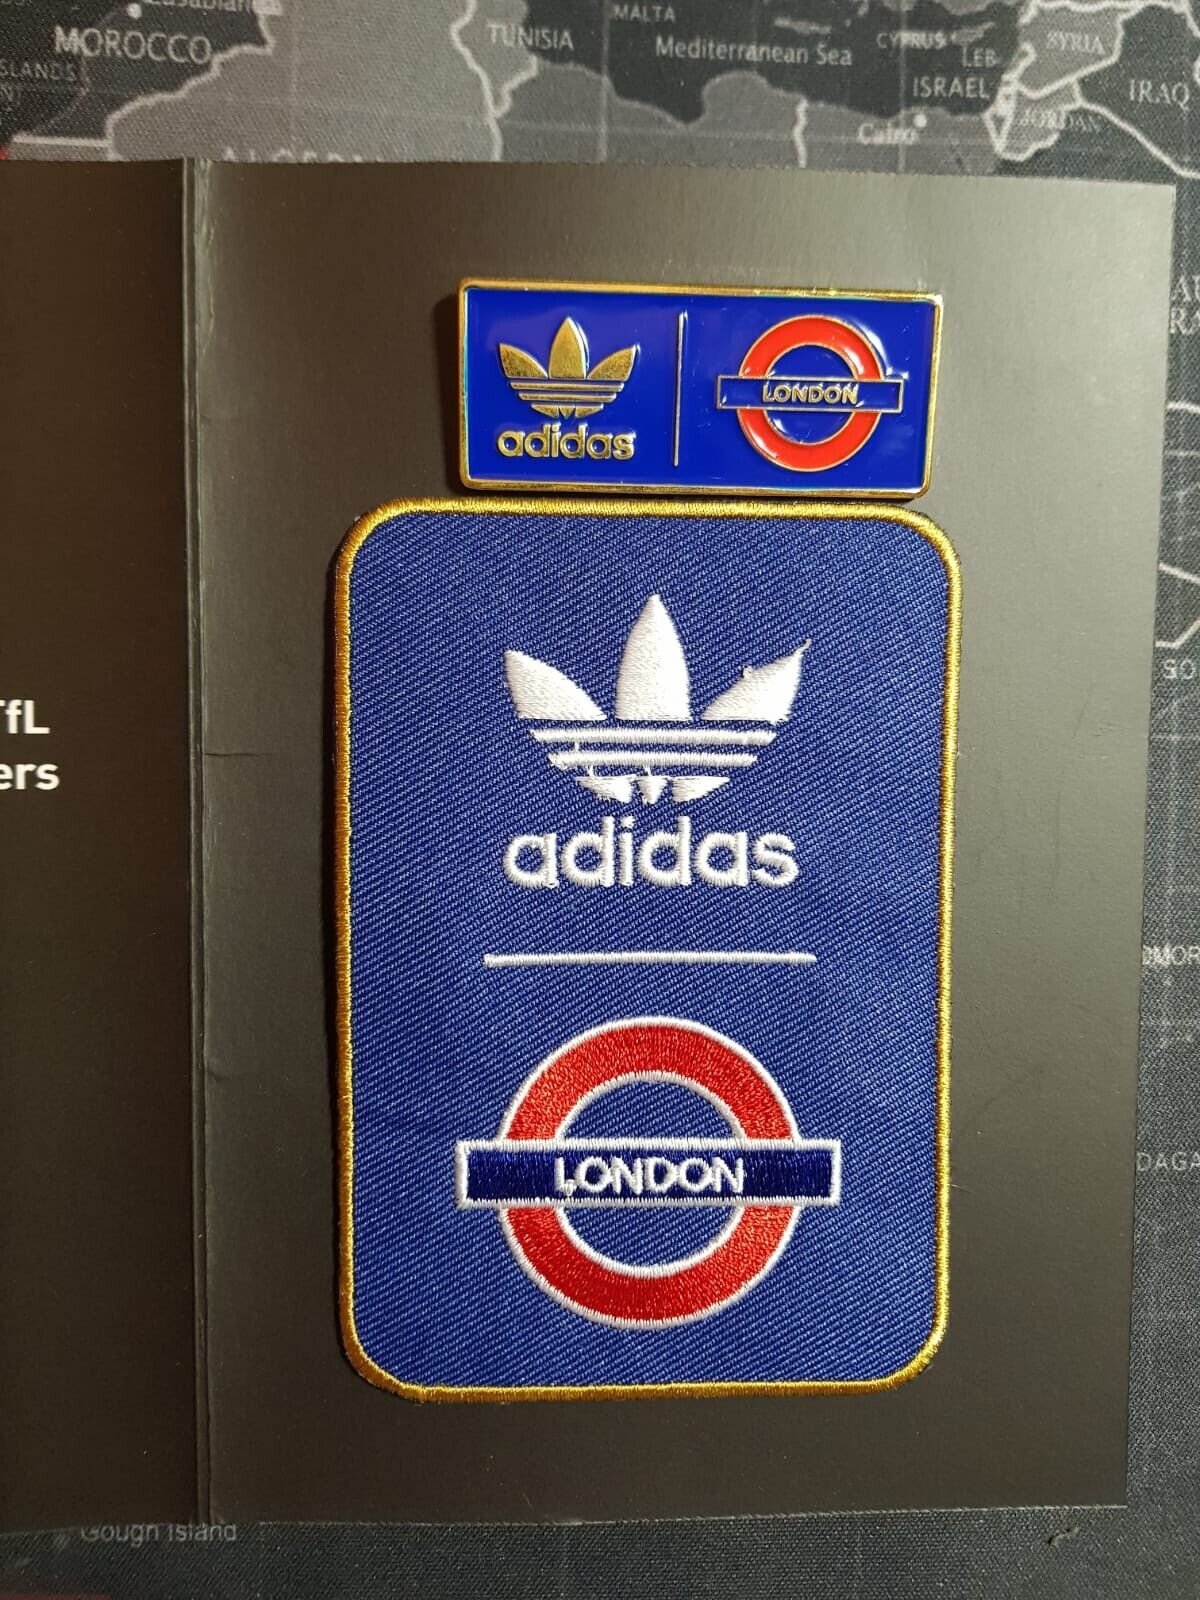 Adidas TfL London Collectible Badge, Patch and Oyster Card holder